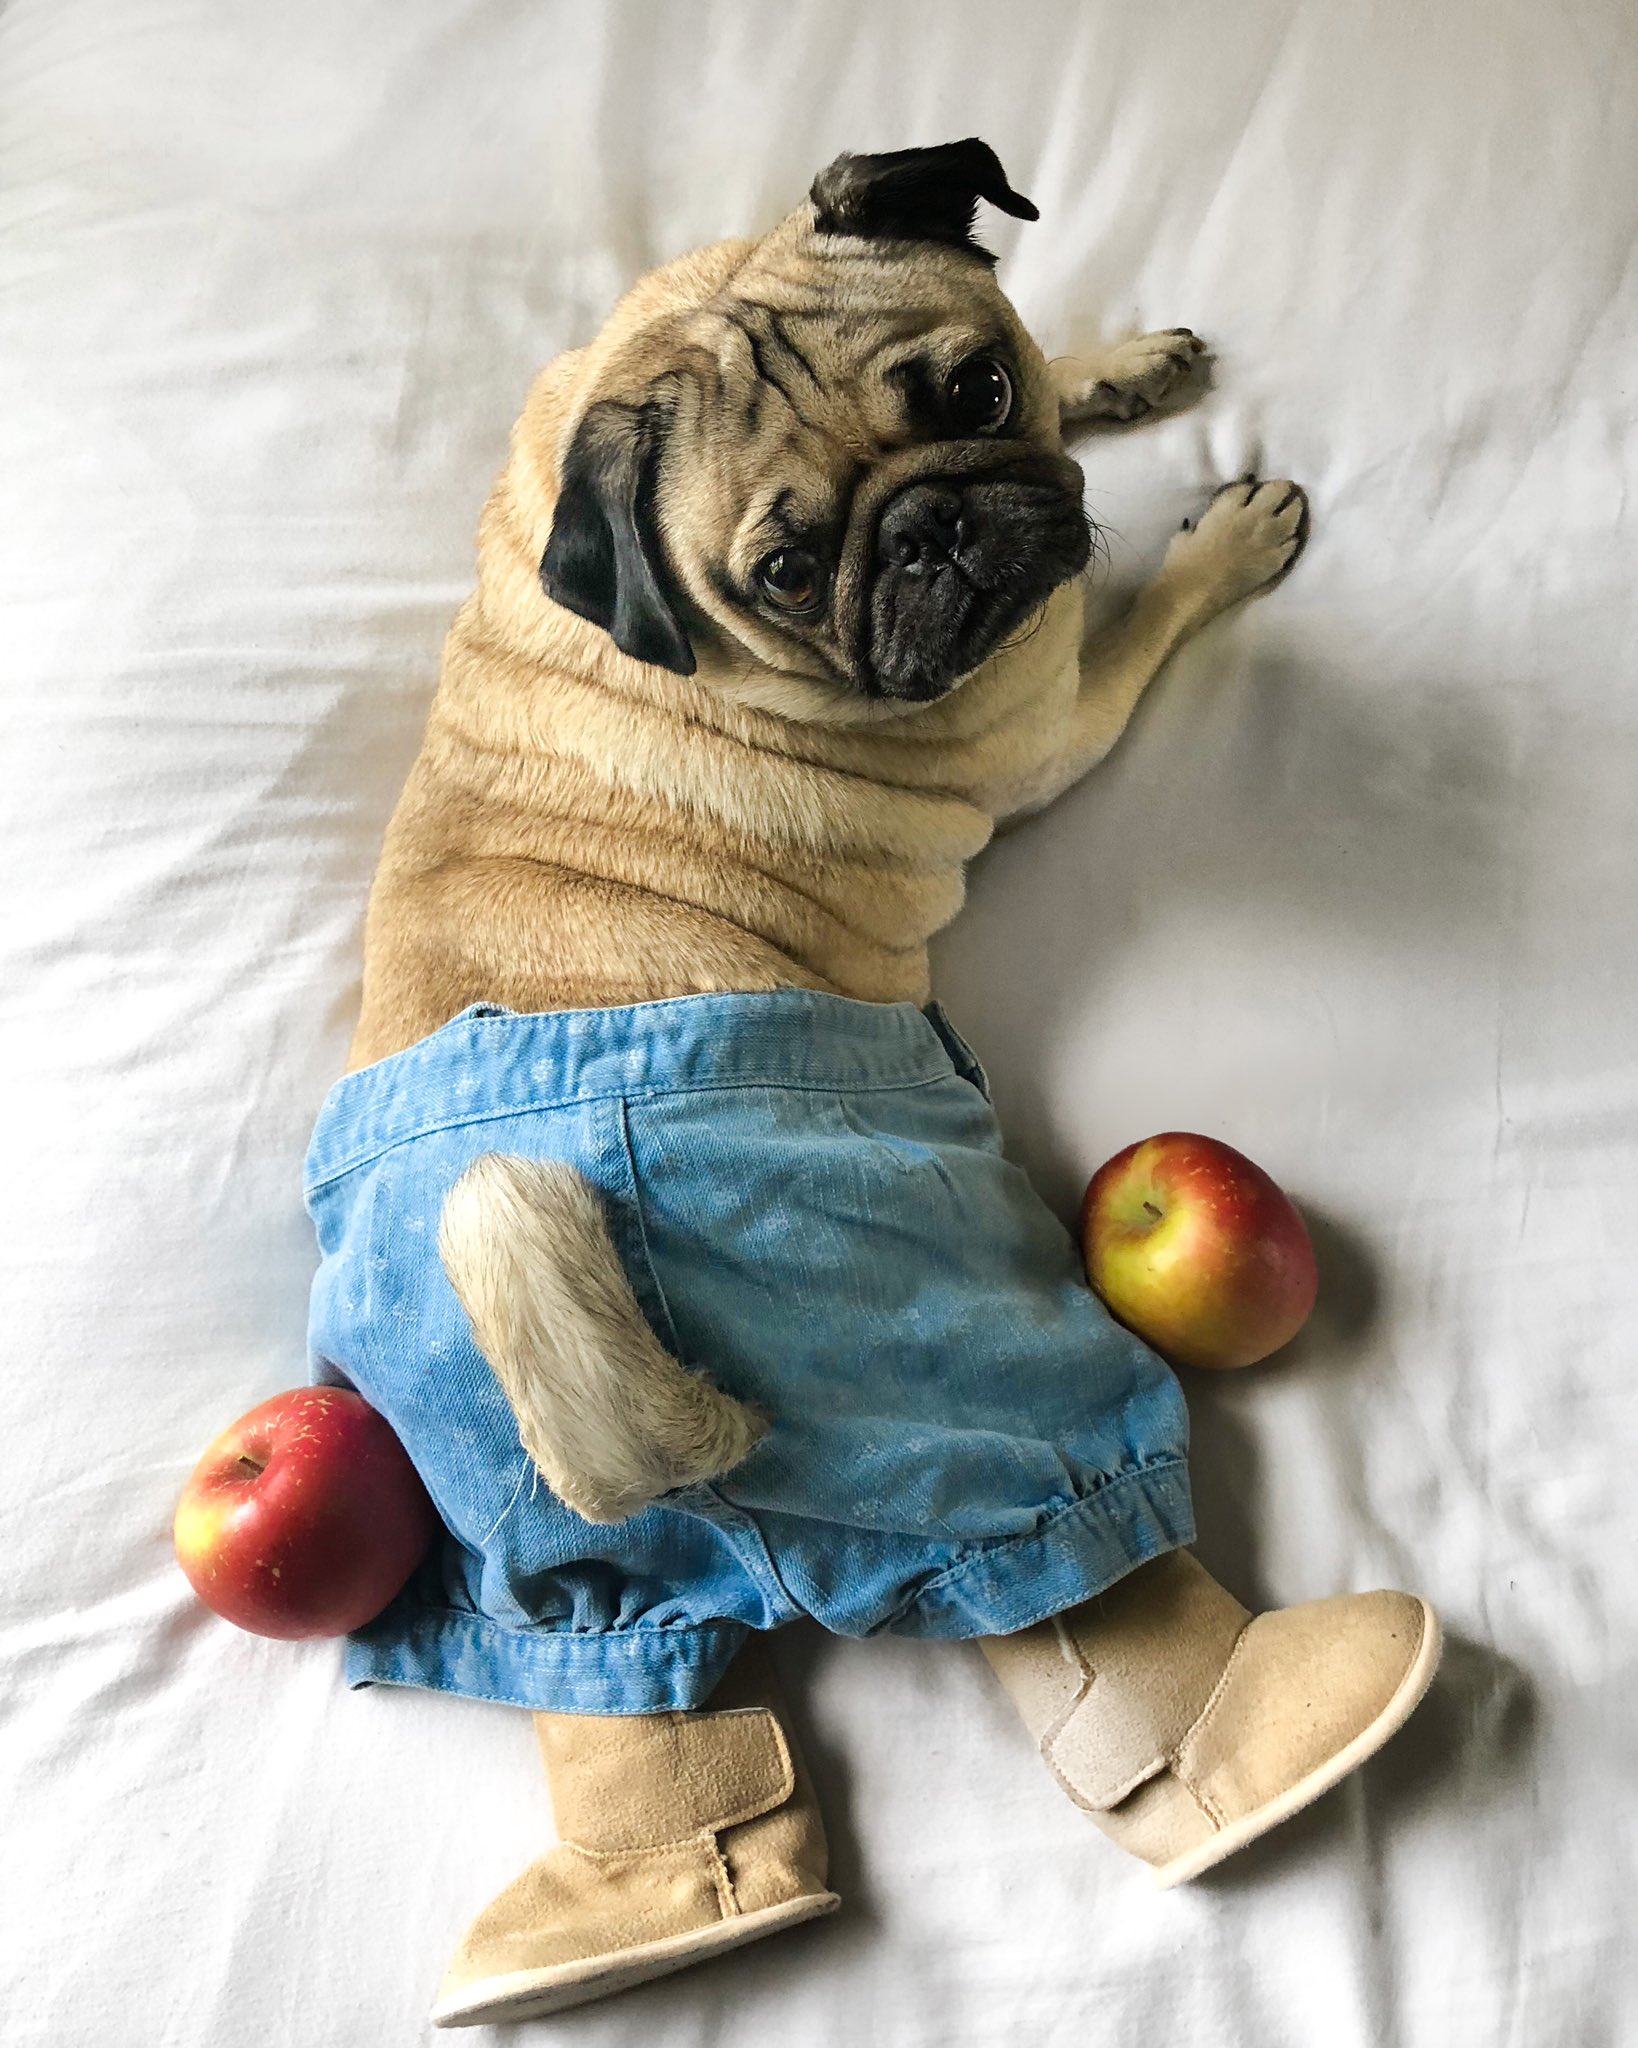 Rig mand Tænke Vil Doug The Pug on X: "Shawty had them apple bottom jeans, boots with the fur  https://t.co/ERy7txCpR9" / X